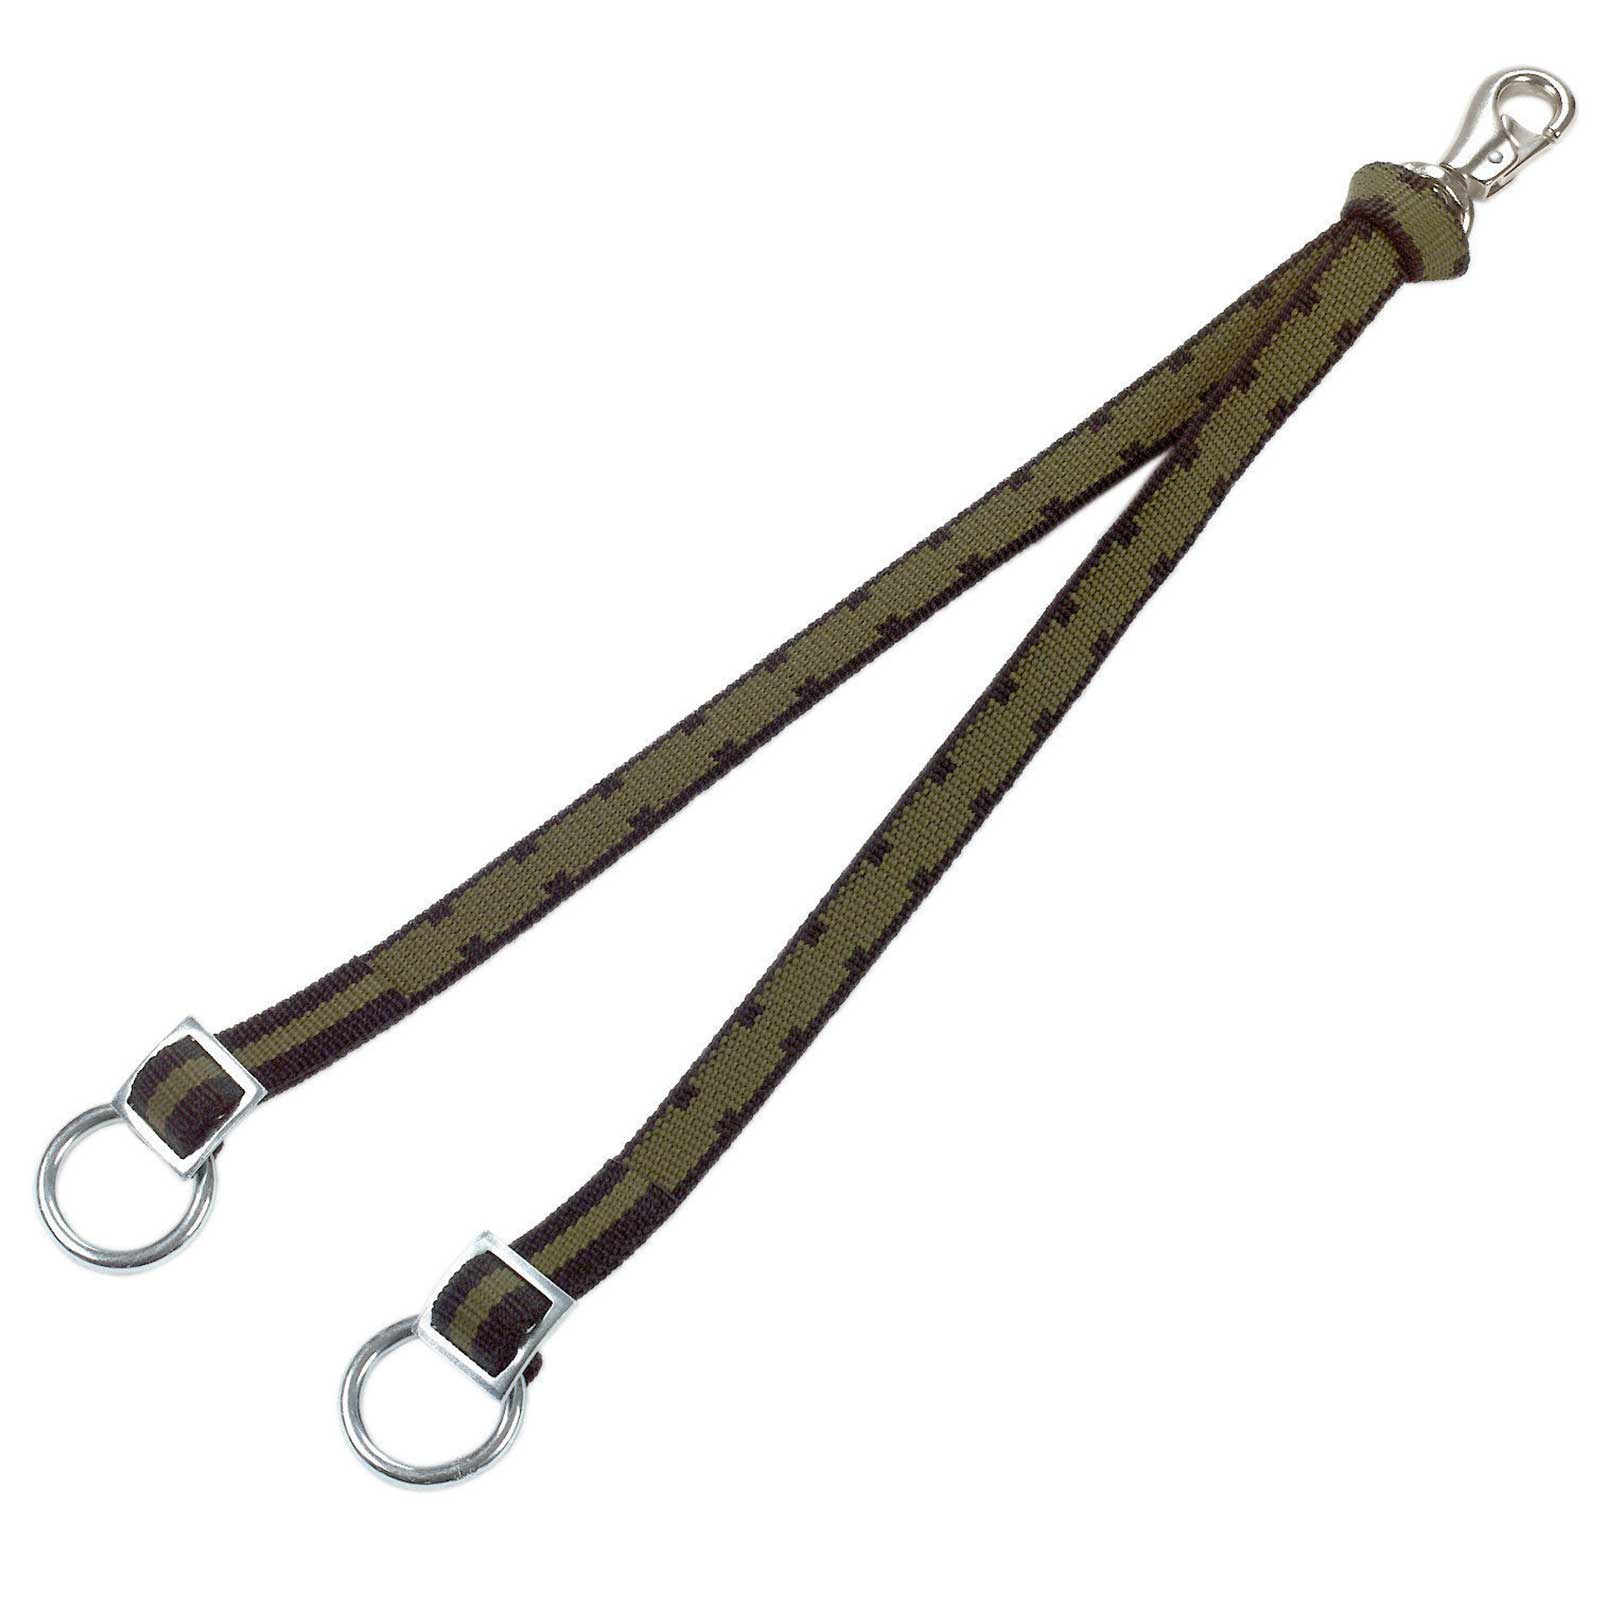 Ground strap double, with carabiner, 75 cm